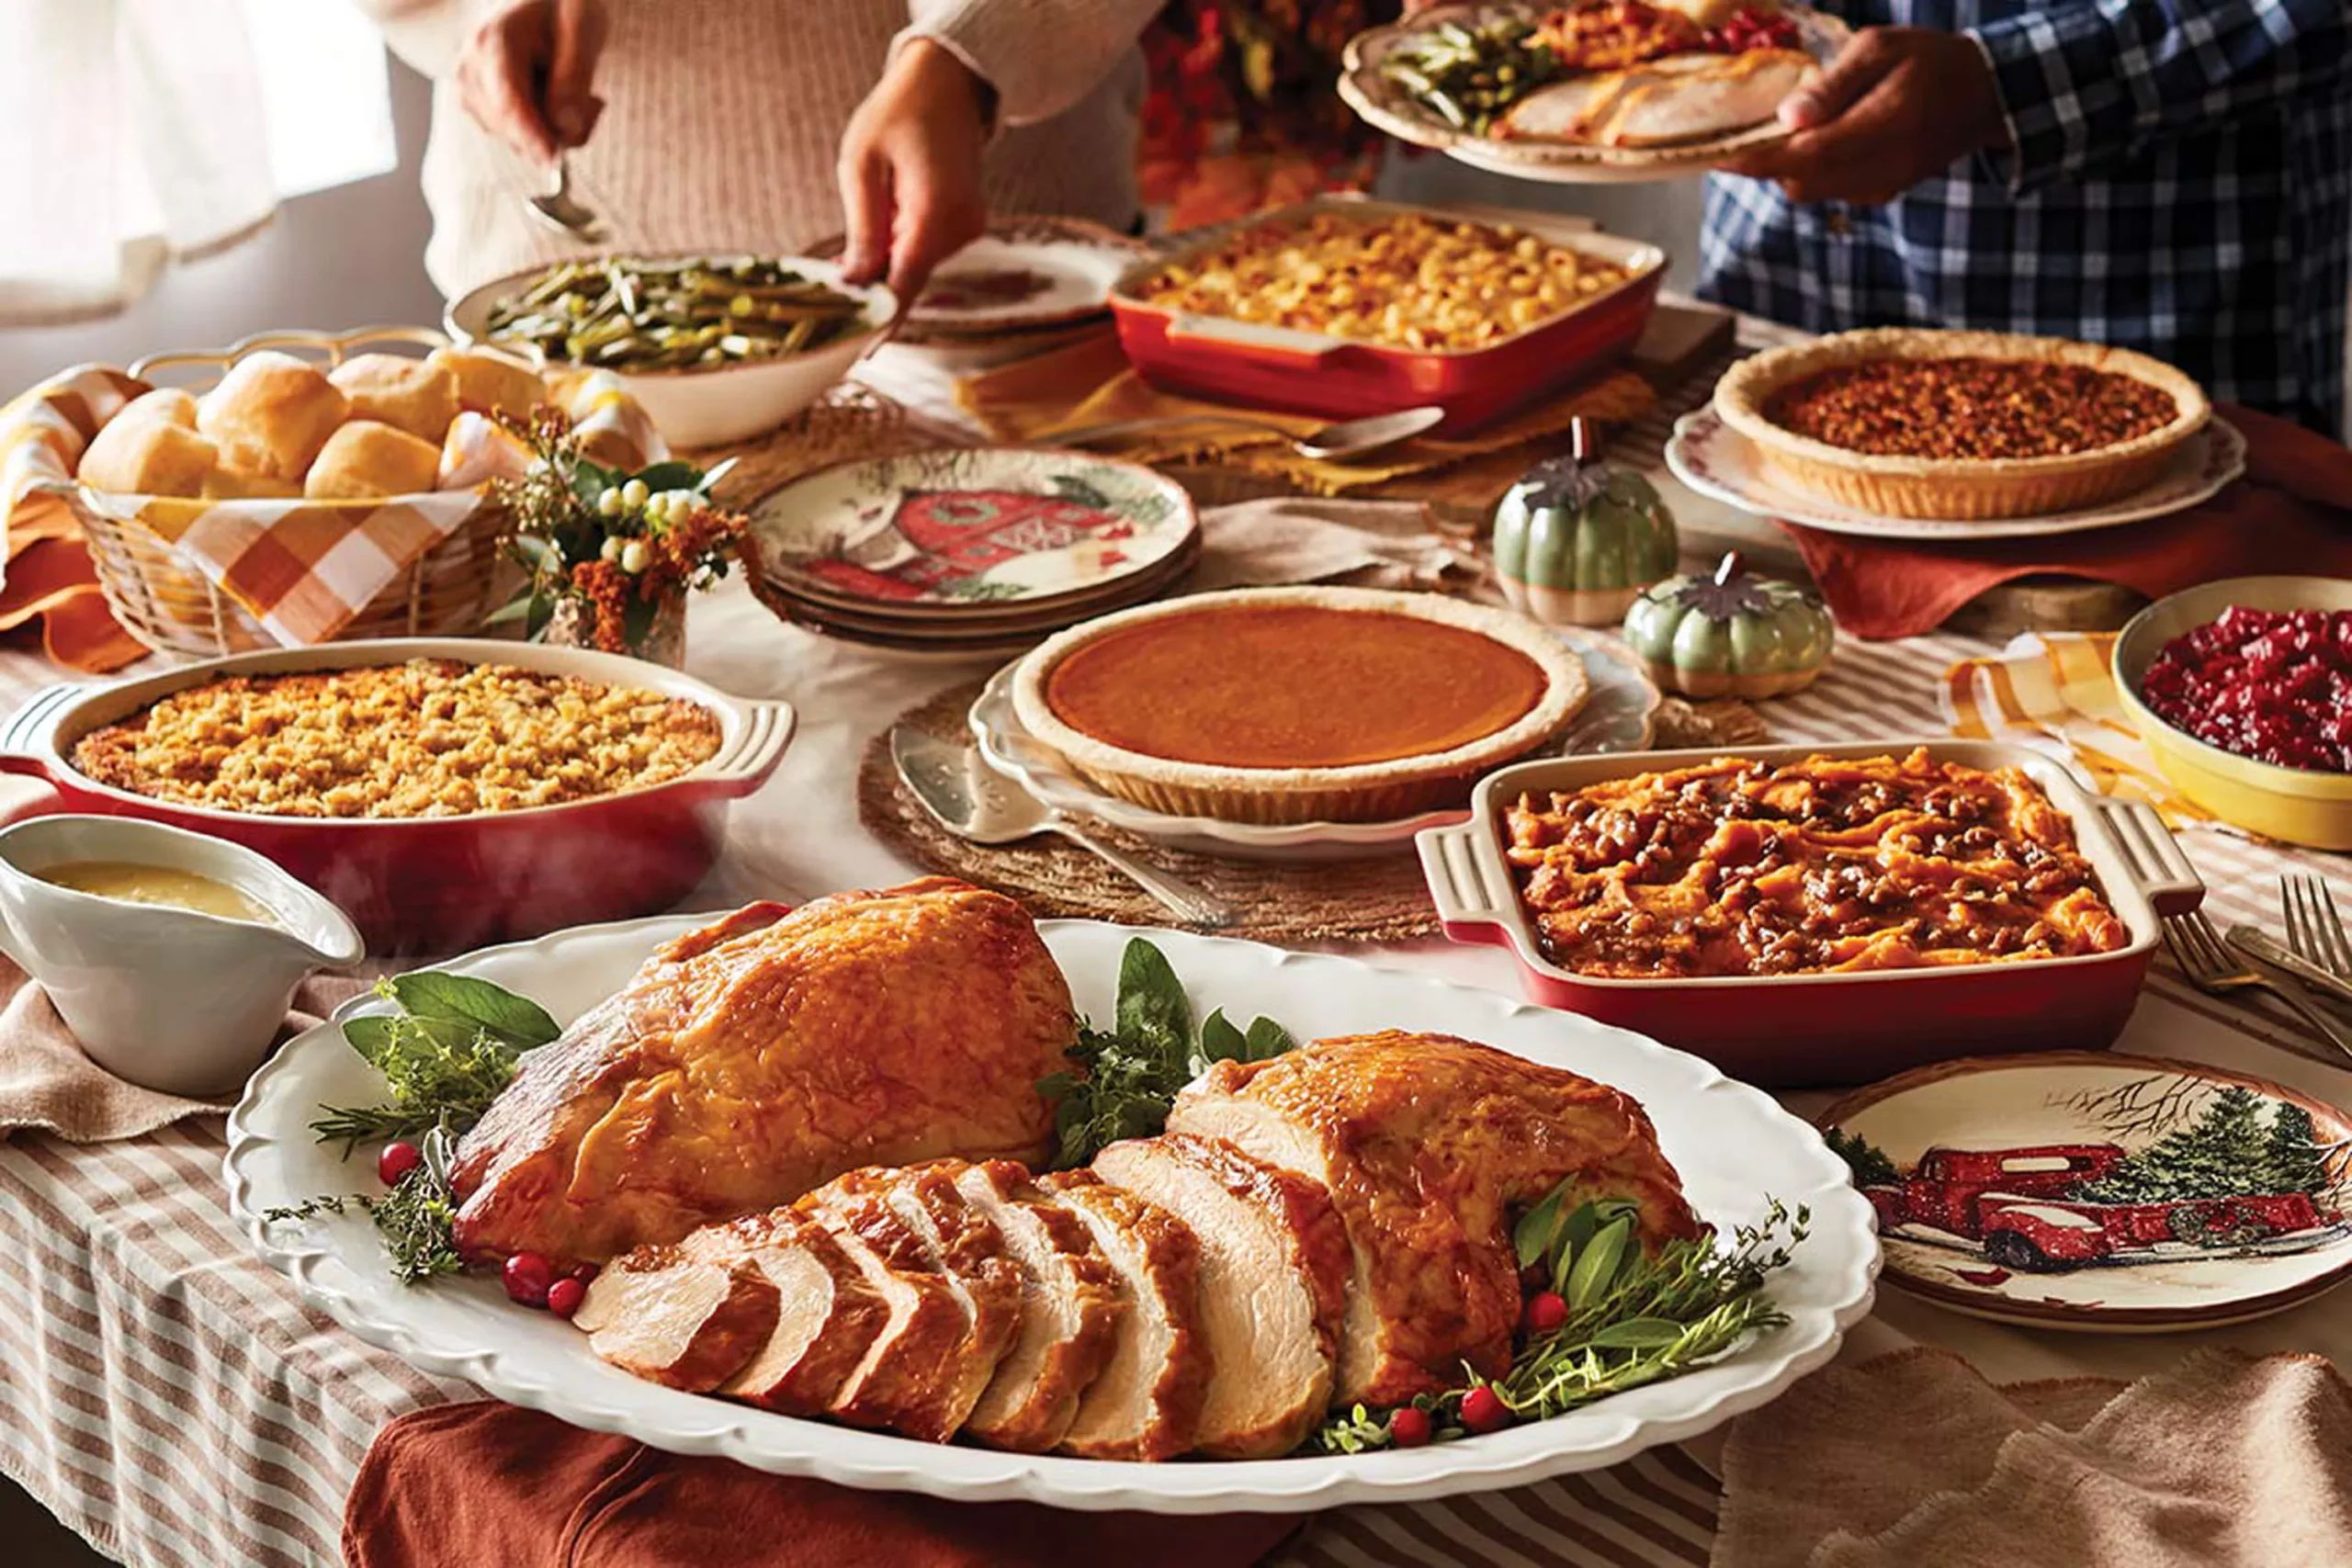 Give thanks in style by enjoying special Thanksgiving meals at 39 handpicked restaurants in Tampa Bay